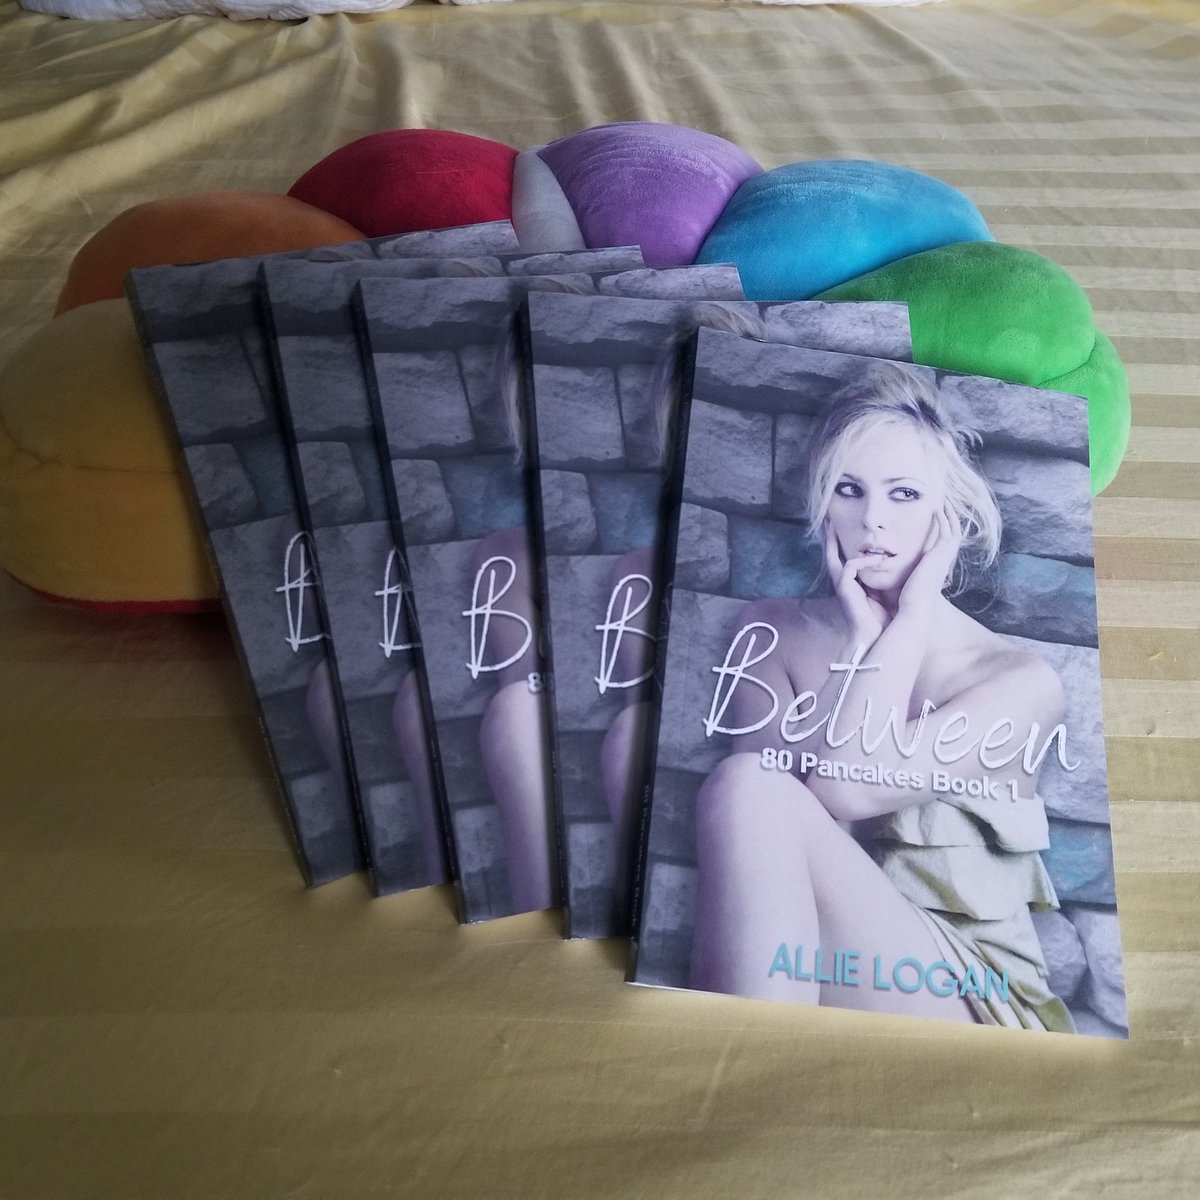 Recieved some author copies of Between! Getting ready to send out signed paperbacks! If you're interested in getting one, contact me to discuss. #paperback #signedcopy #romanceauthor #romancebooks #newauthor #writingcommunity #readingcommunity #debutnovel